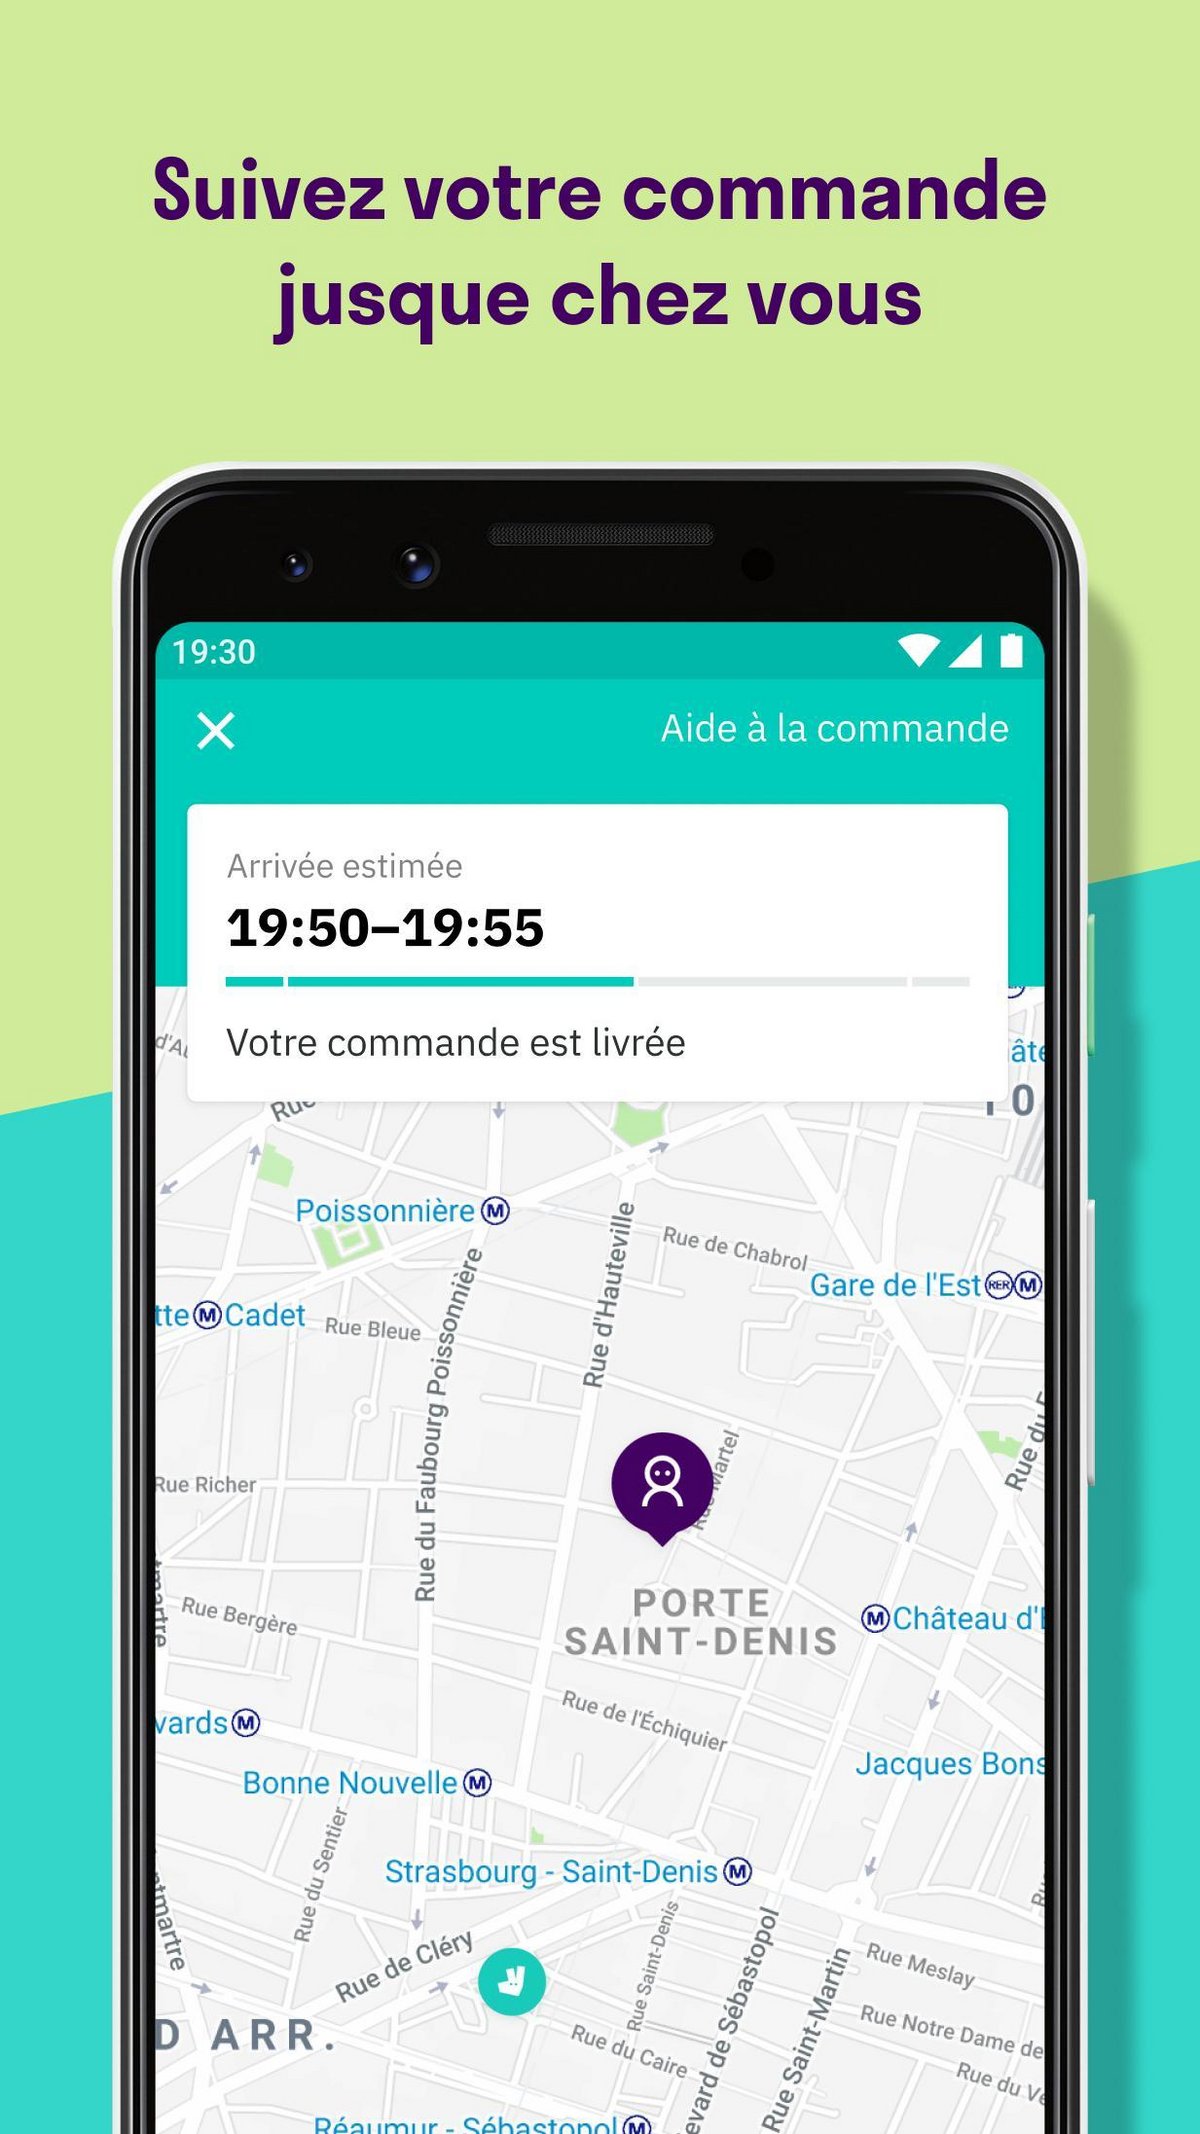 Deliveroo Android